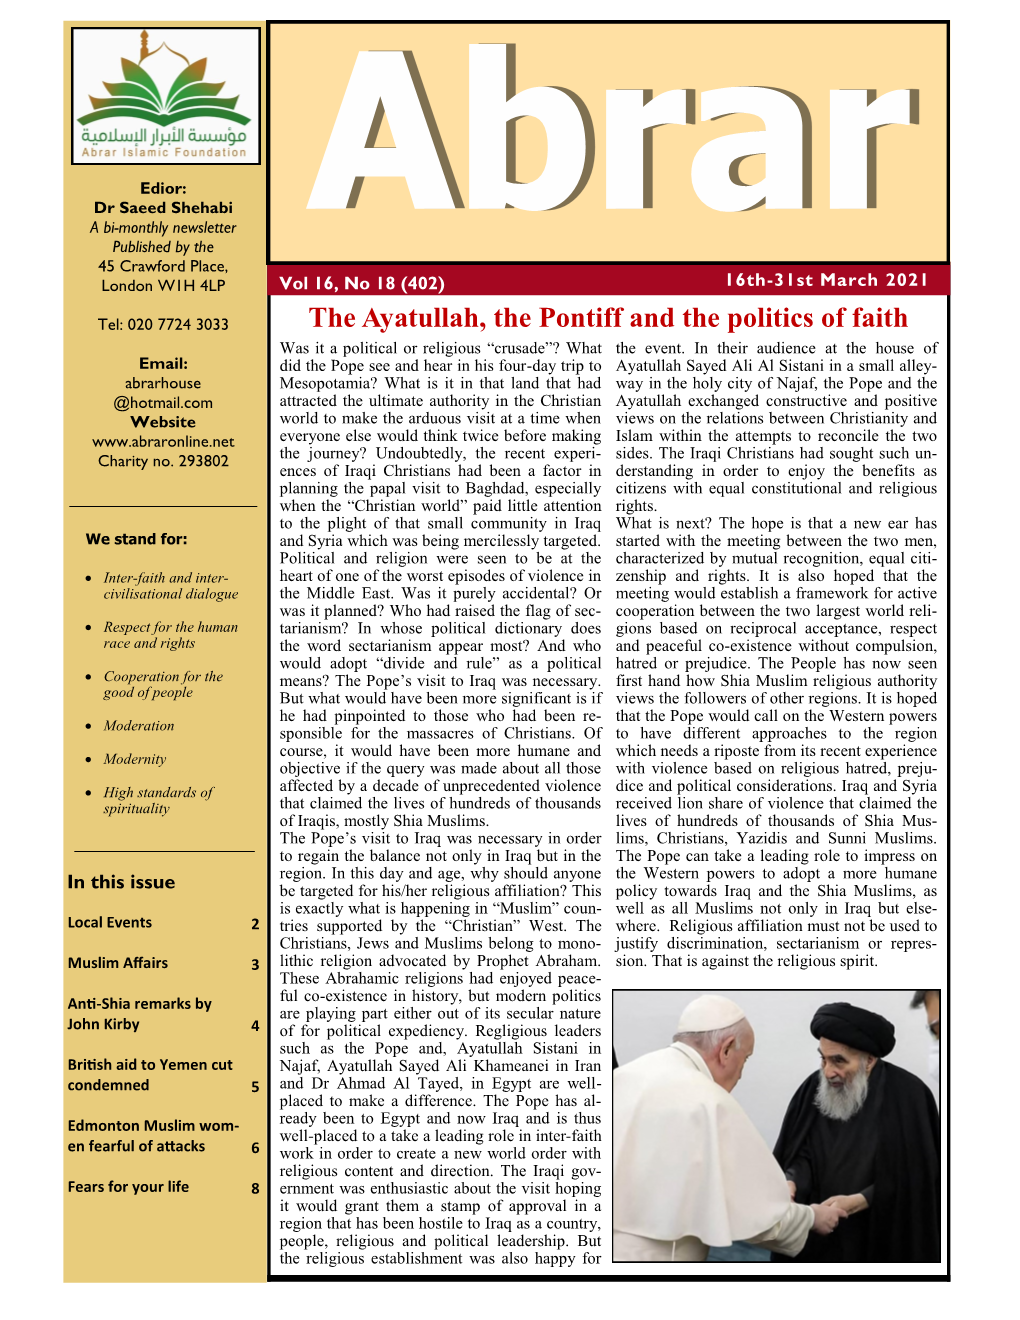 The Ayatullah, the Pontiff and the Politics of Faith Was It a Political Or Religious “Crusade”? What the Event